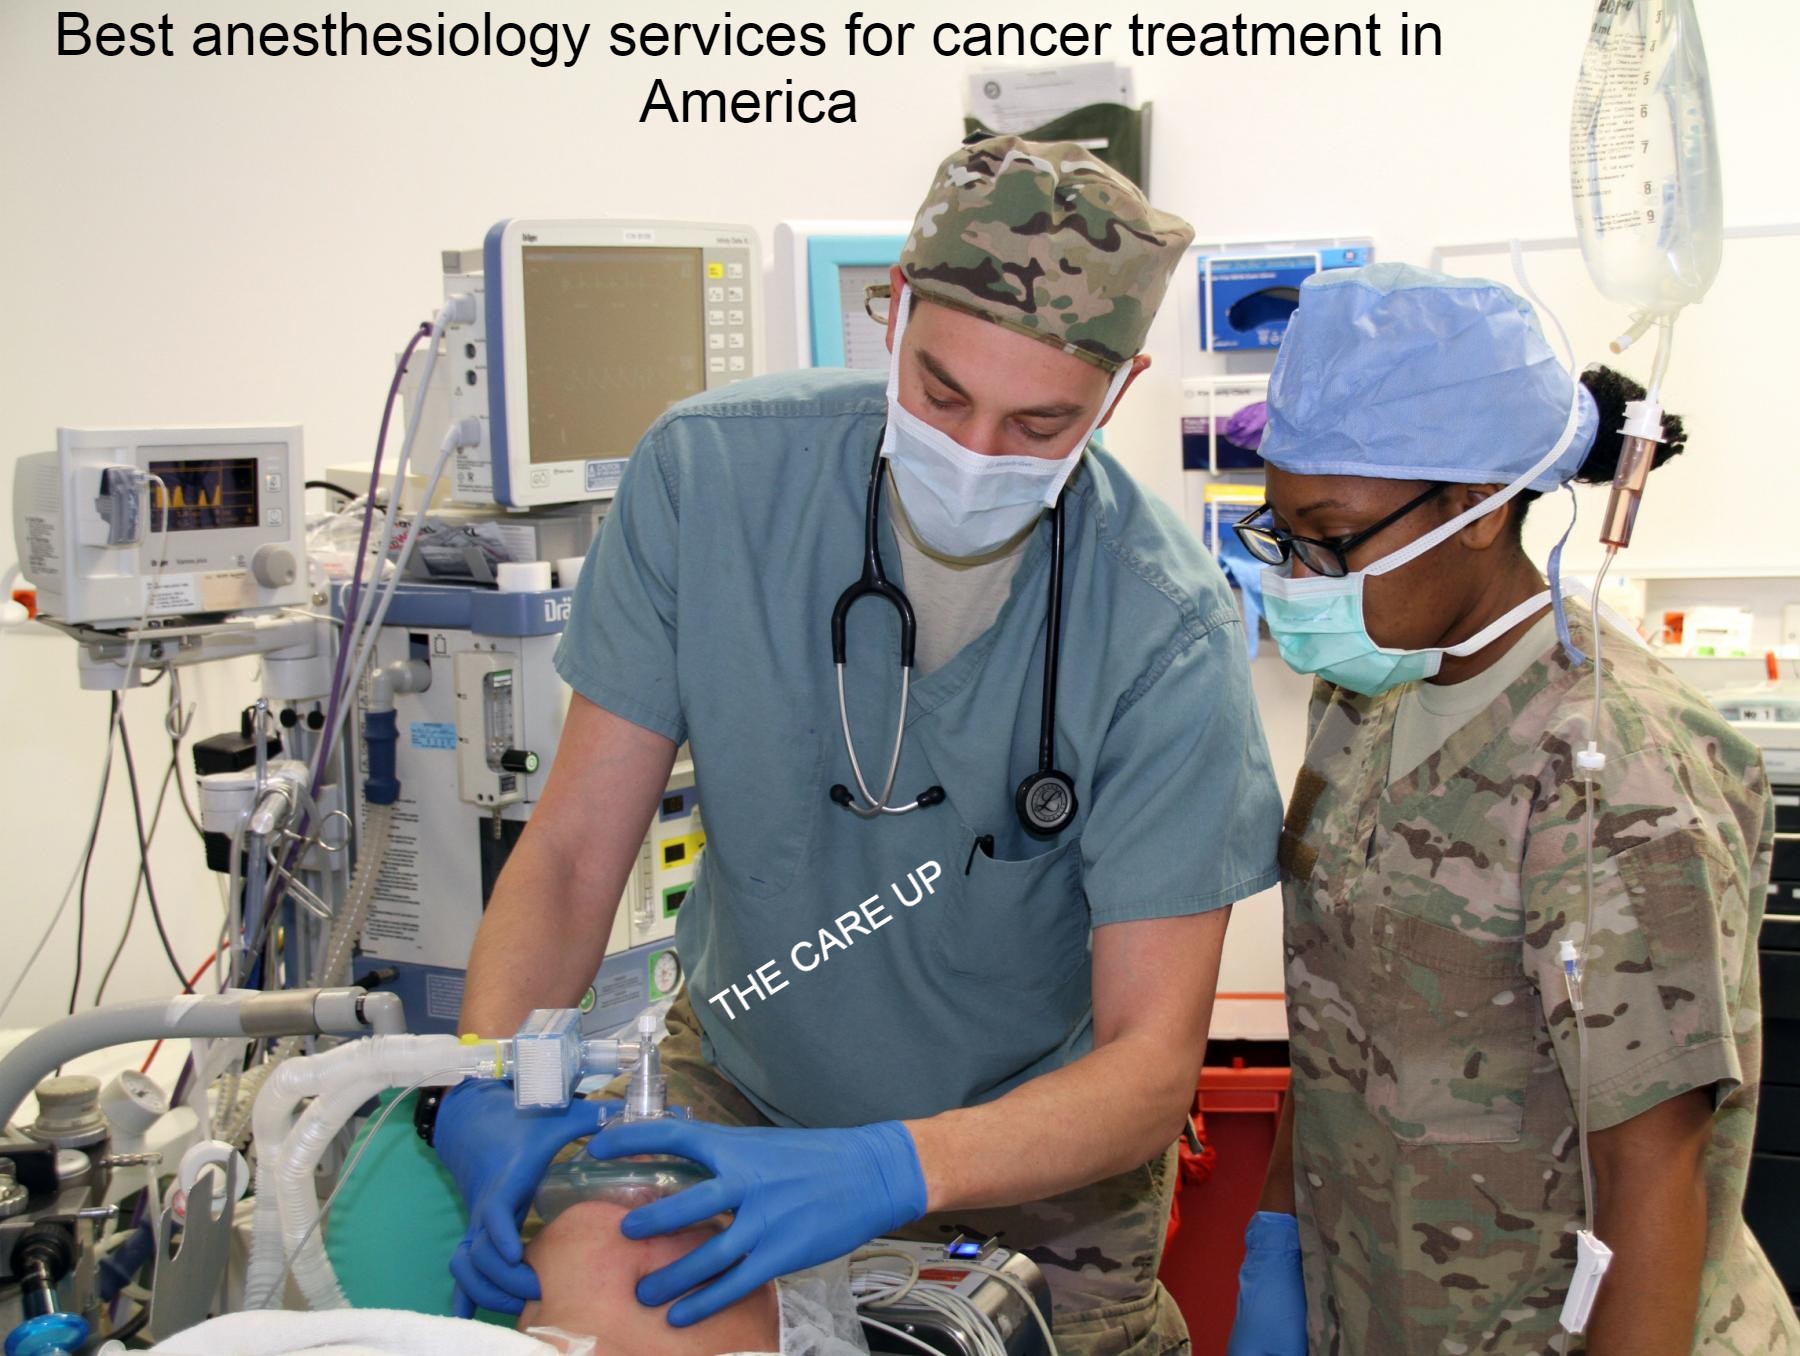 Best anesthesiology services for cancer treatment in America